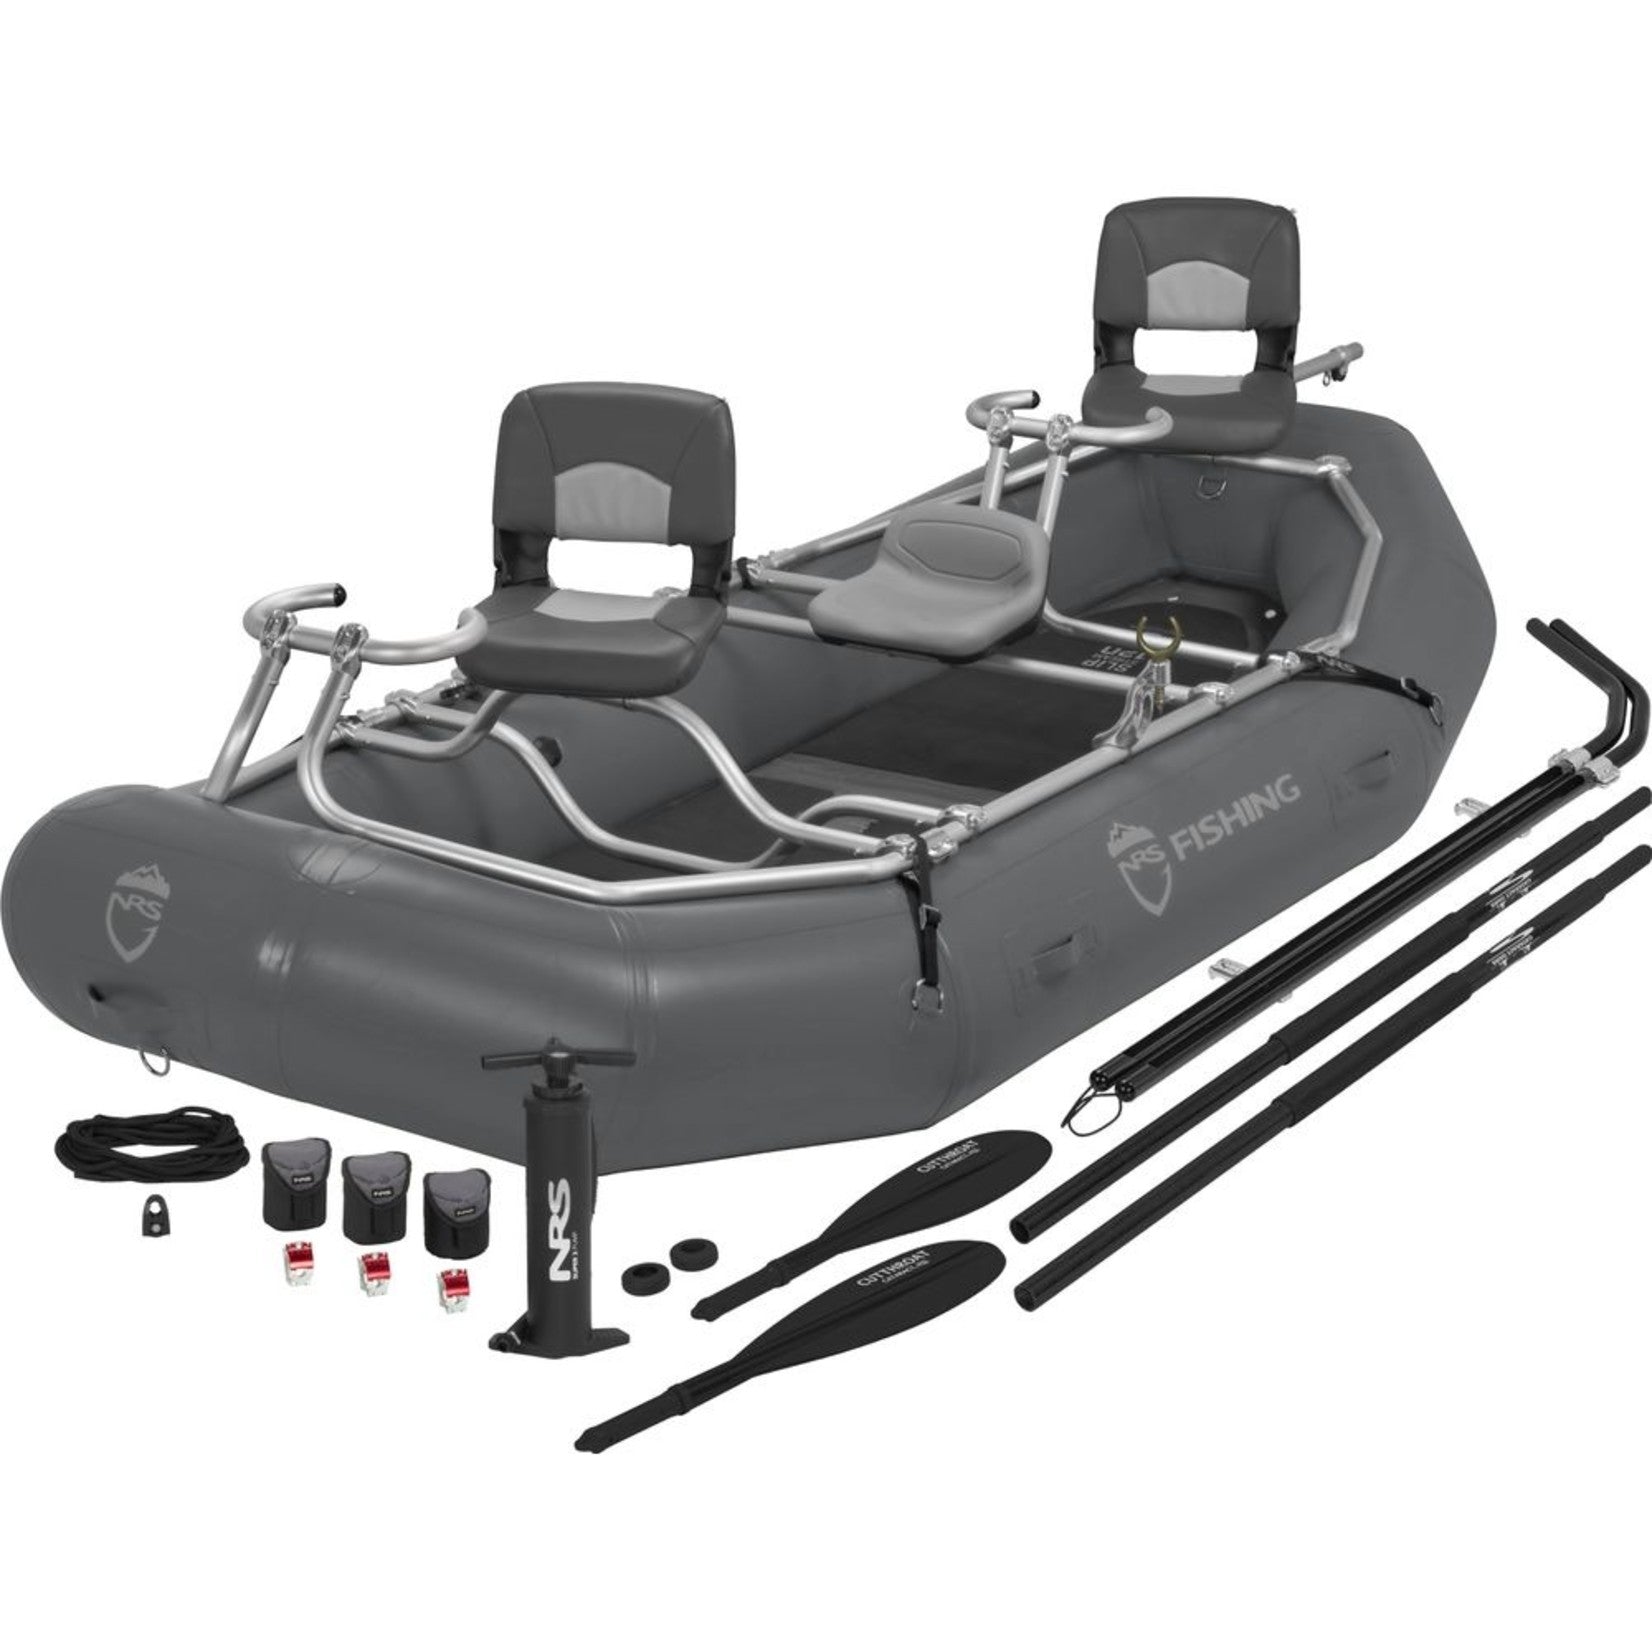 NRS Slipstream 120 Fishing Raft Deluxe Packages